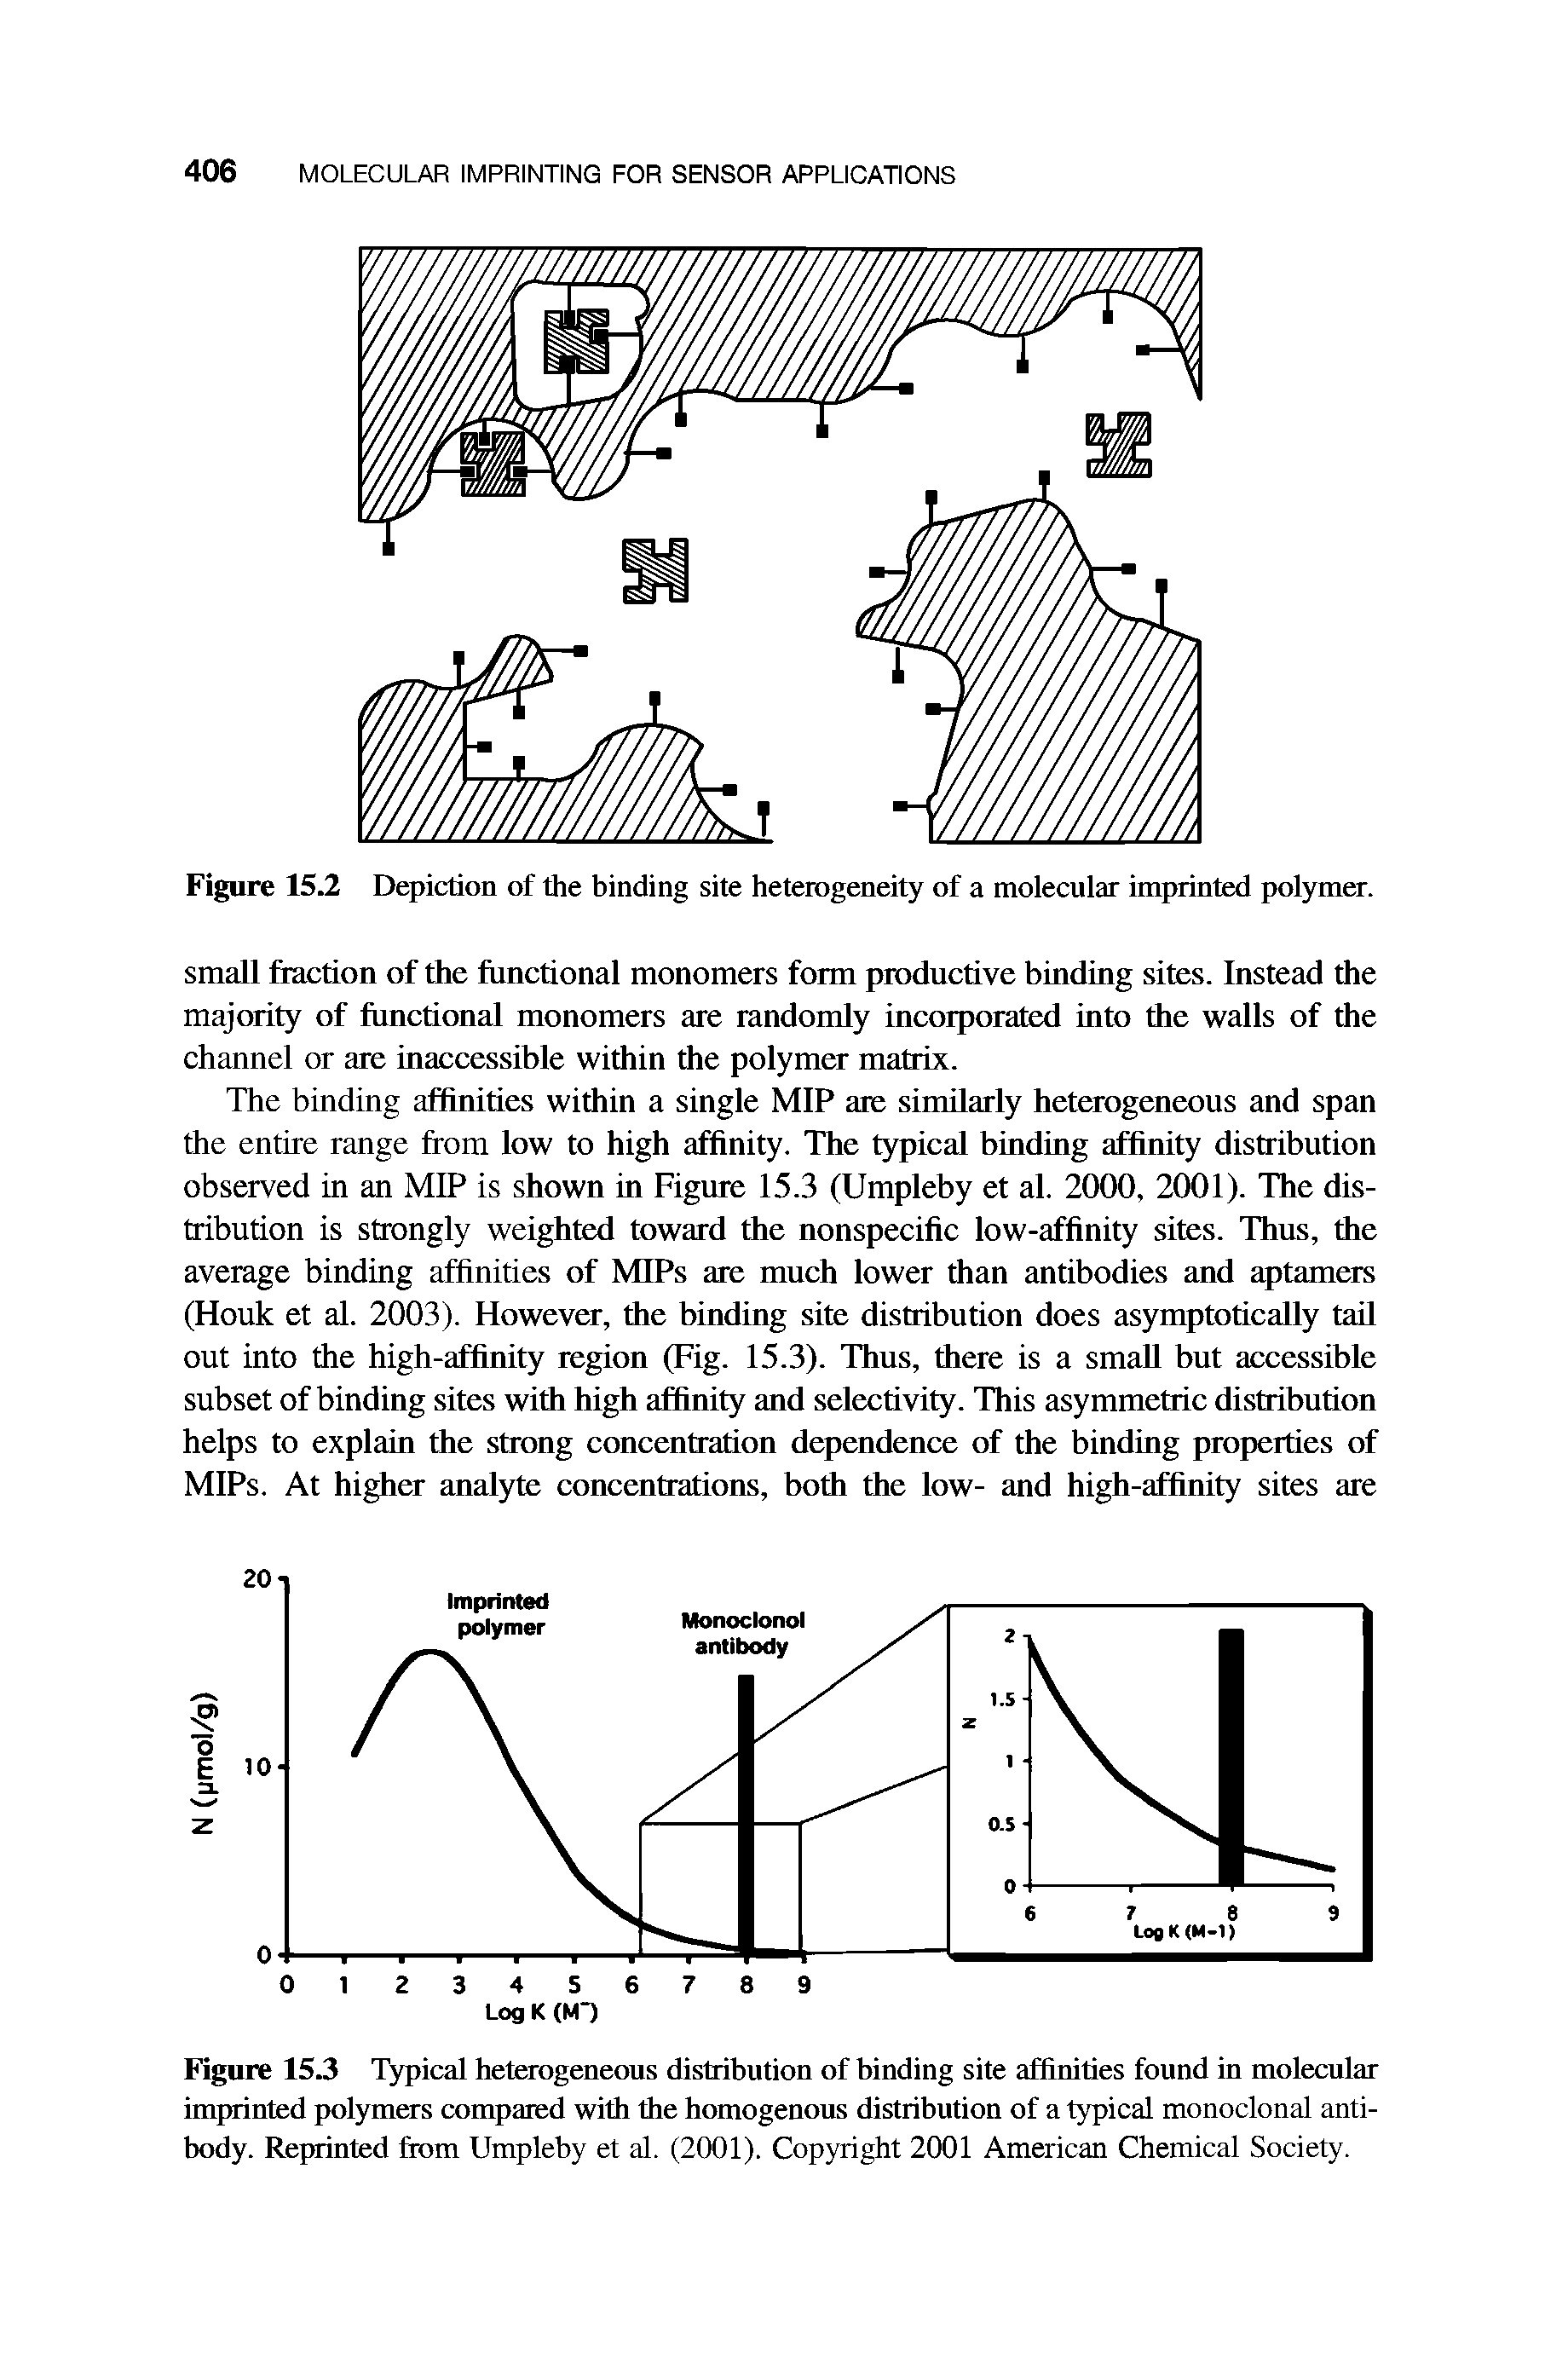 Figure 15.3 T3fpical heterogeneous distribution of binding site affinities found in molecular imprinted polymers compared with the homogenous distribution of a typical monoclonal antibody. Reprinted from Umpleby et al. (2001). Copyright 2001 American Chemical Society.